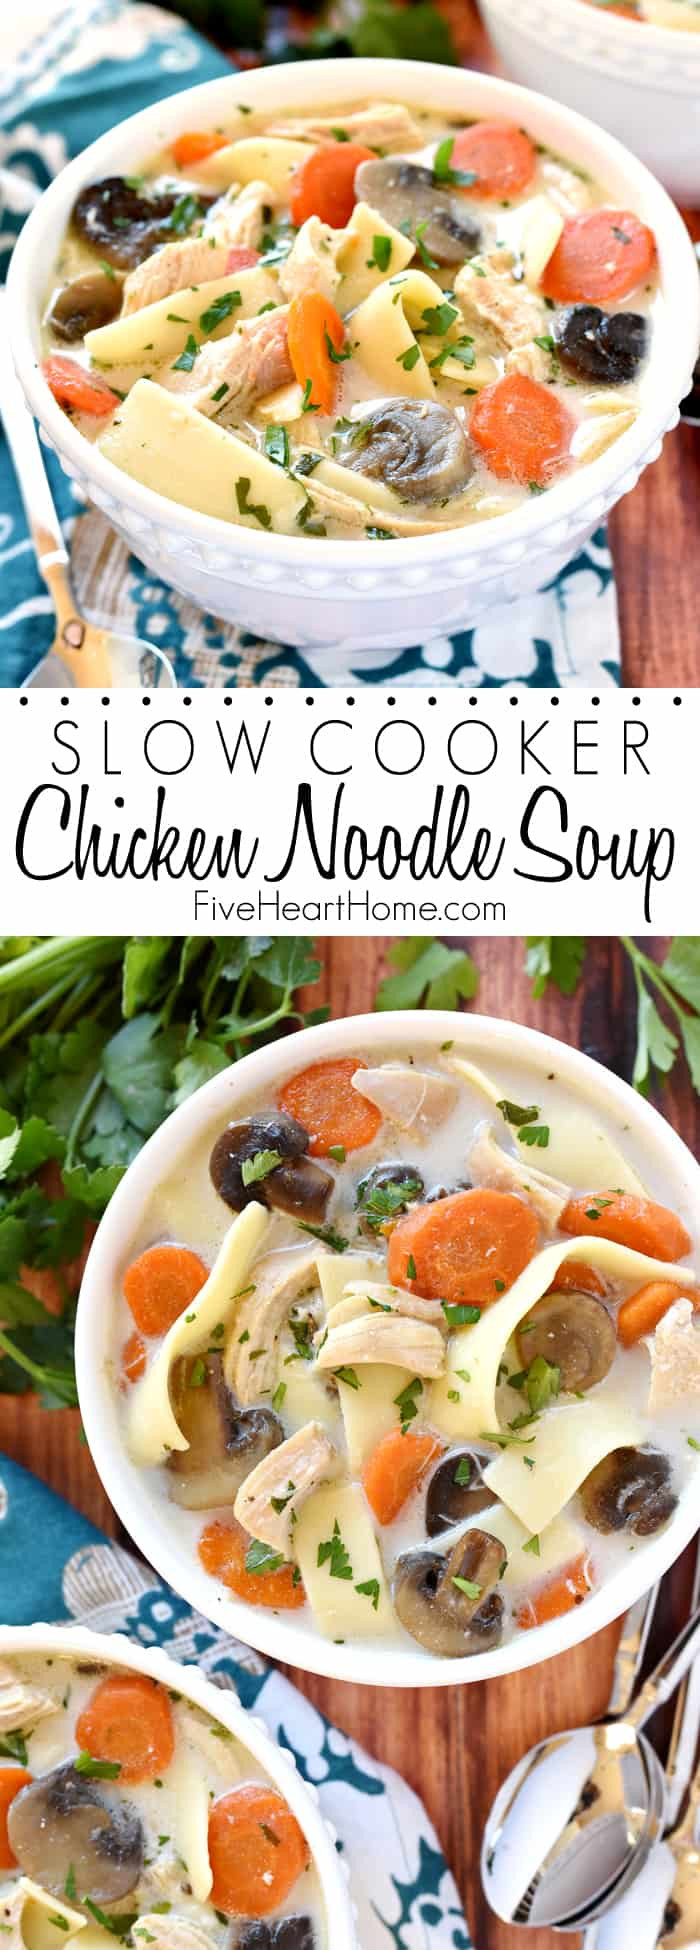 Slow Cooker Chicken Noodle Soup
 The Best Slow Cooker Chicken Noodle Soup